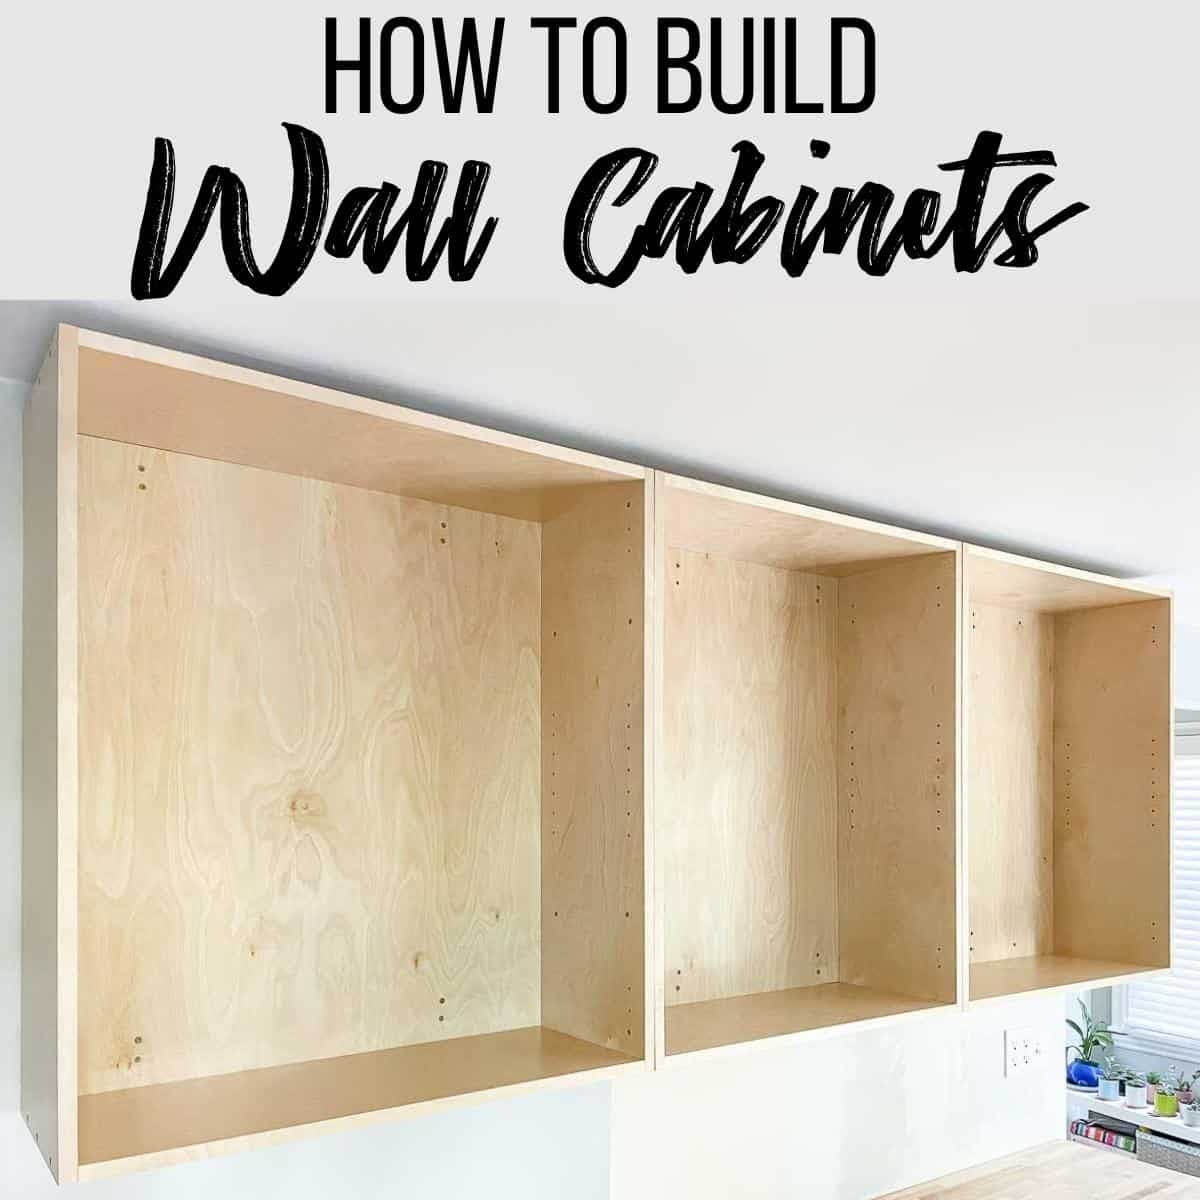 How To Build A Diy Wall Cabinet The, How To Build A Wall Cabinet With Doors